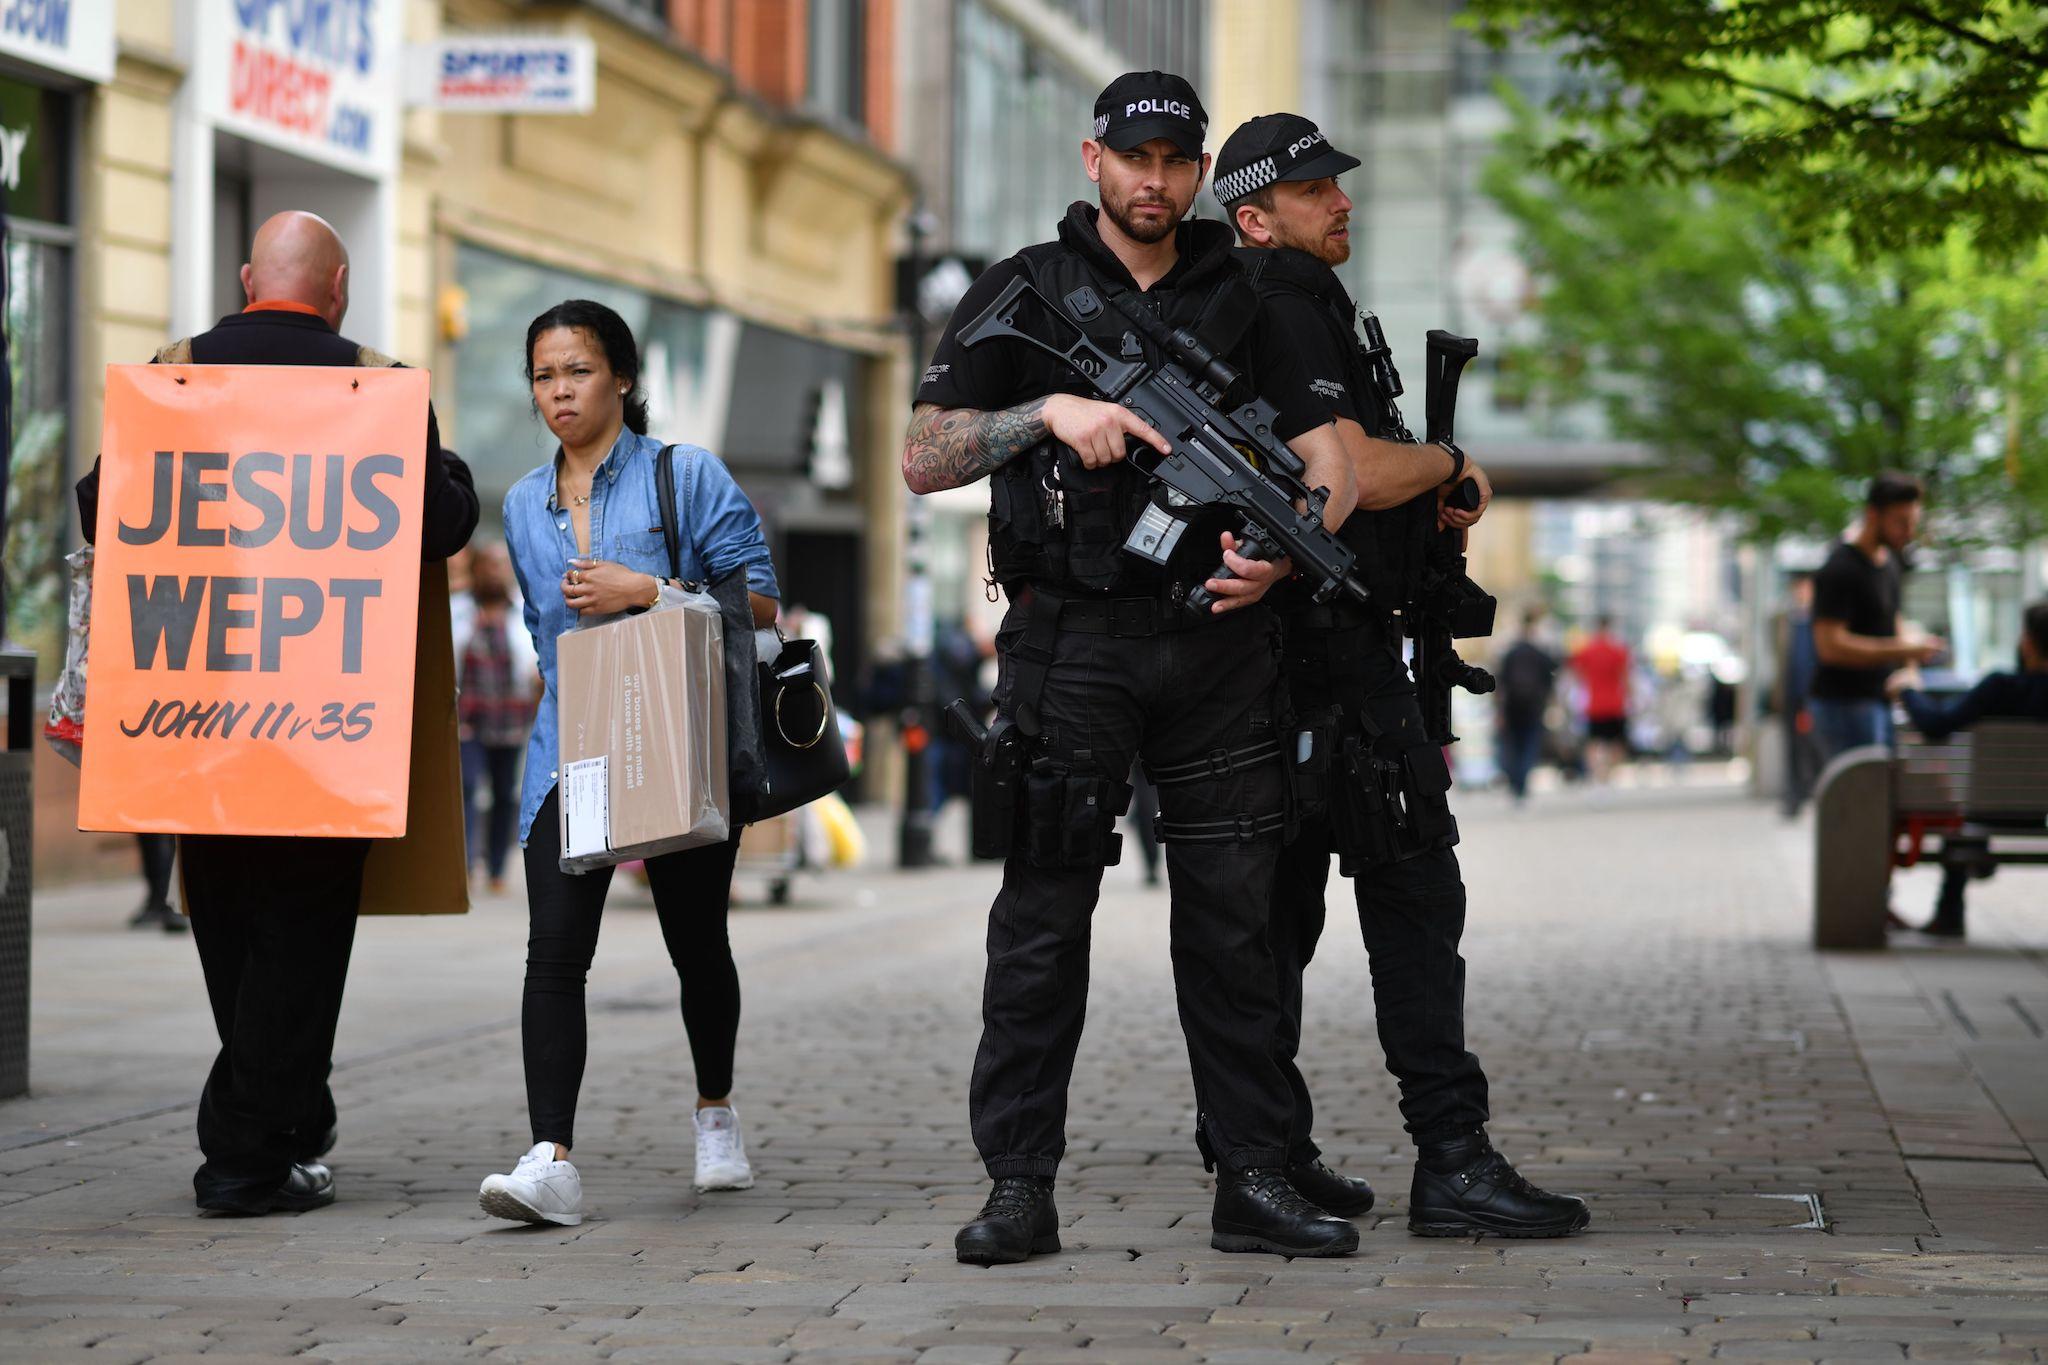 Armed police guard a street in central Manchester following the attacks